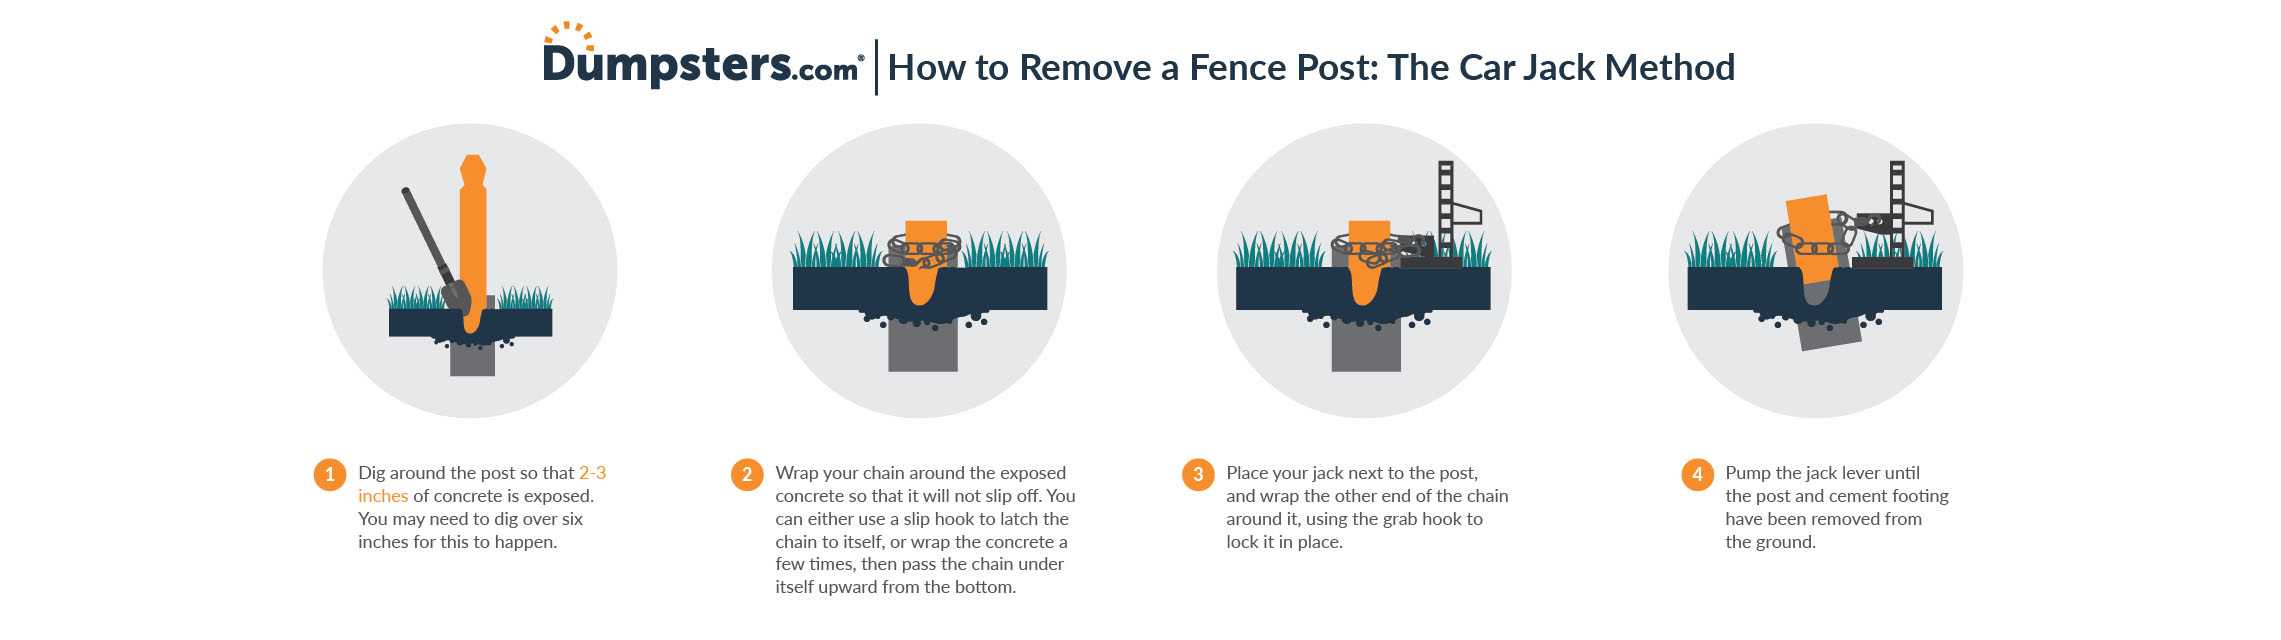 Car jack method step-by-step guide to removing an old fence.